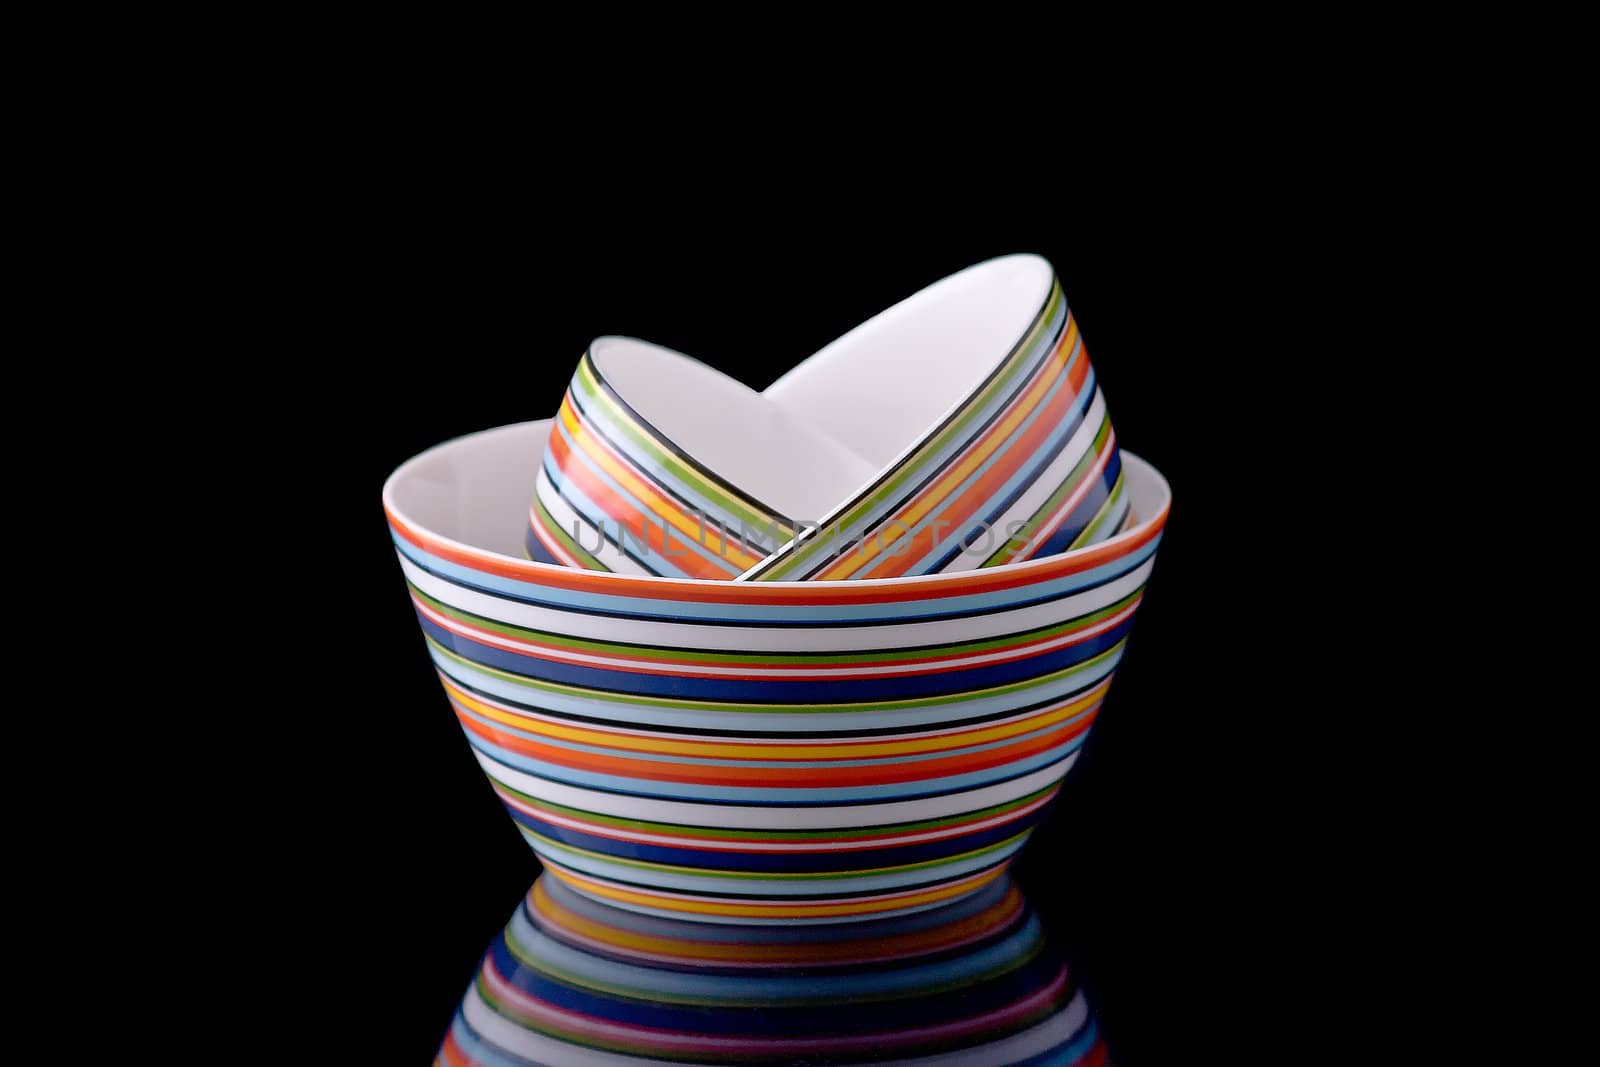 A stack of colorful bowls on a black mirror surface